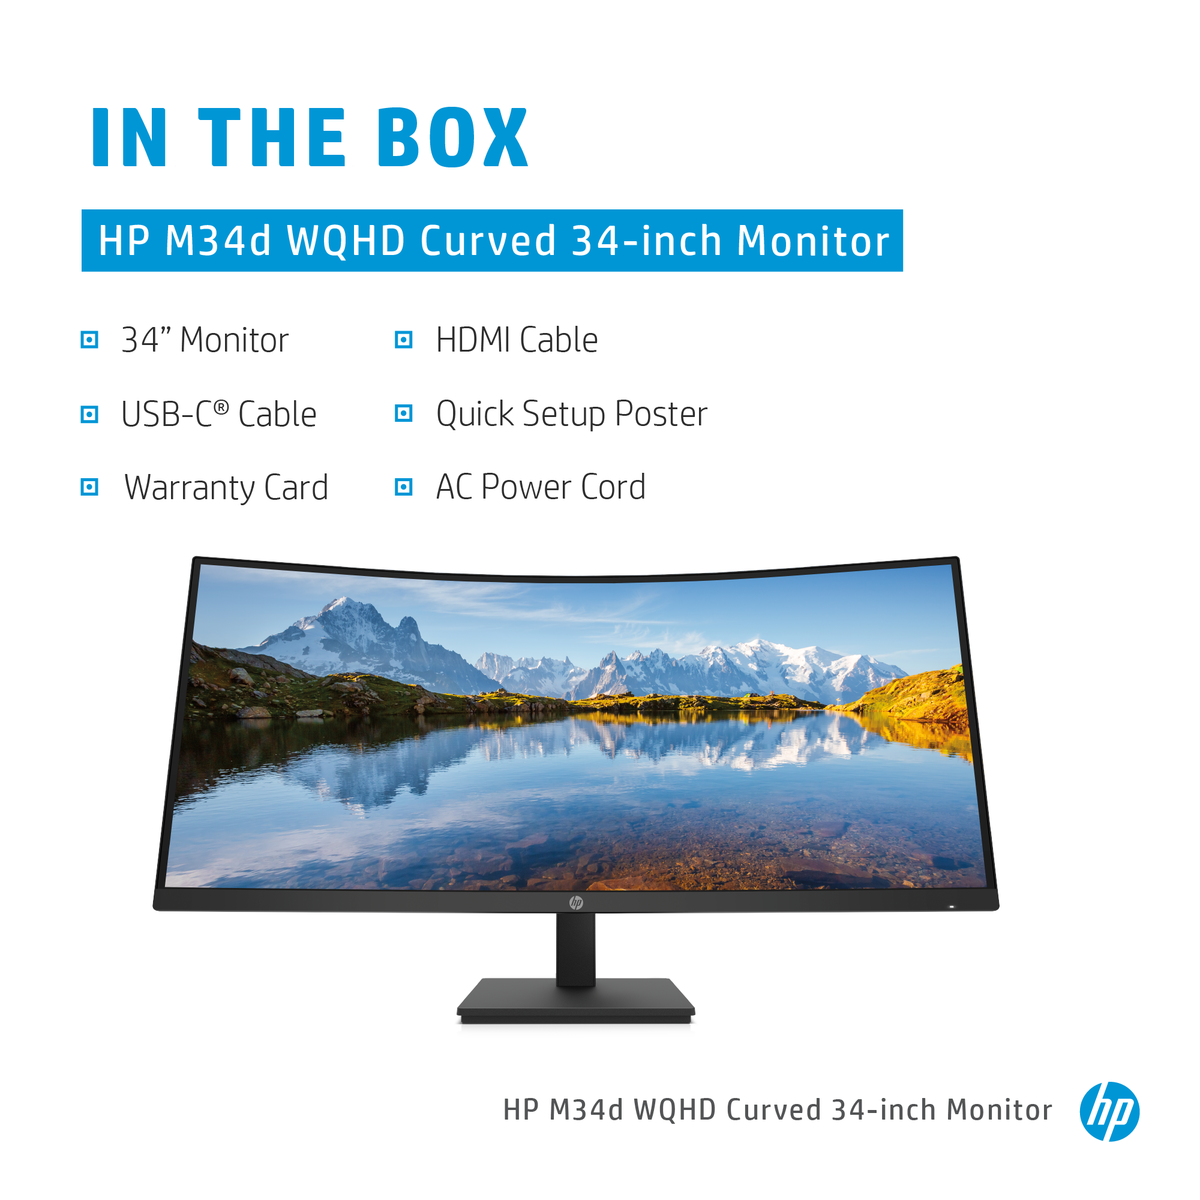 slide 3 of 7, show larger image, hp m34d wqhd curved monitor